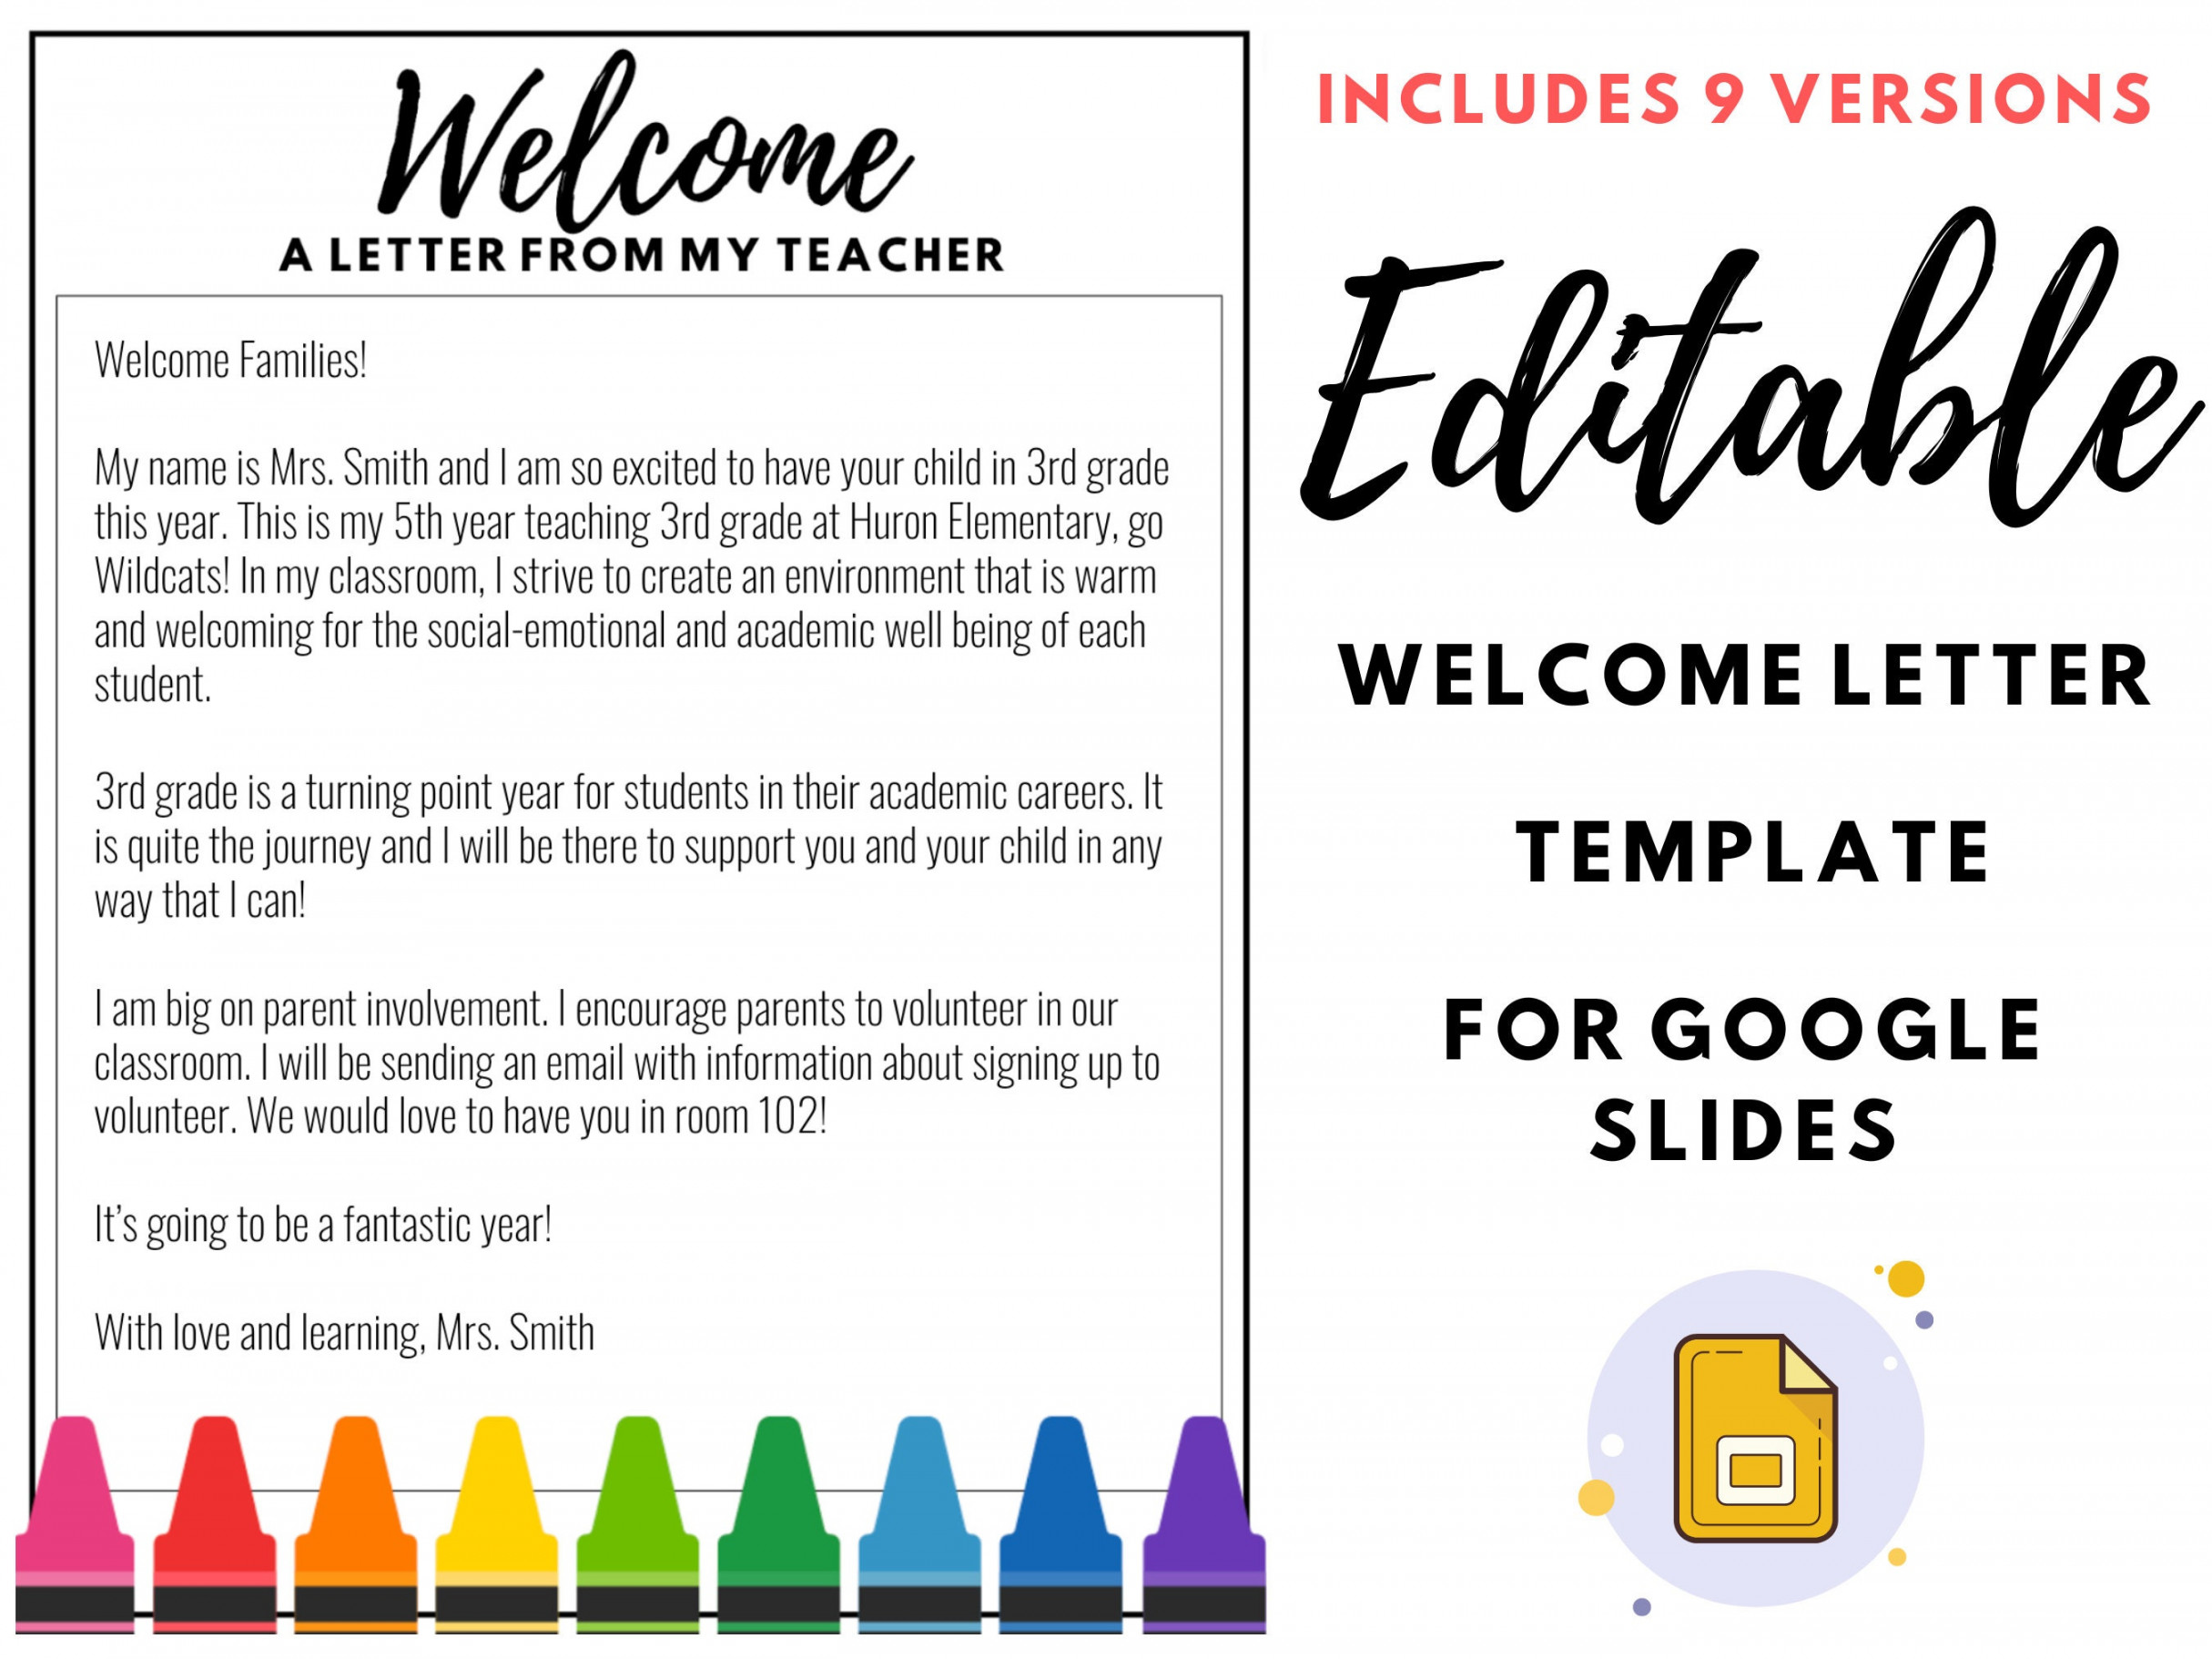 Editable Welcome Letter Template Back to School Google - Etsy